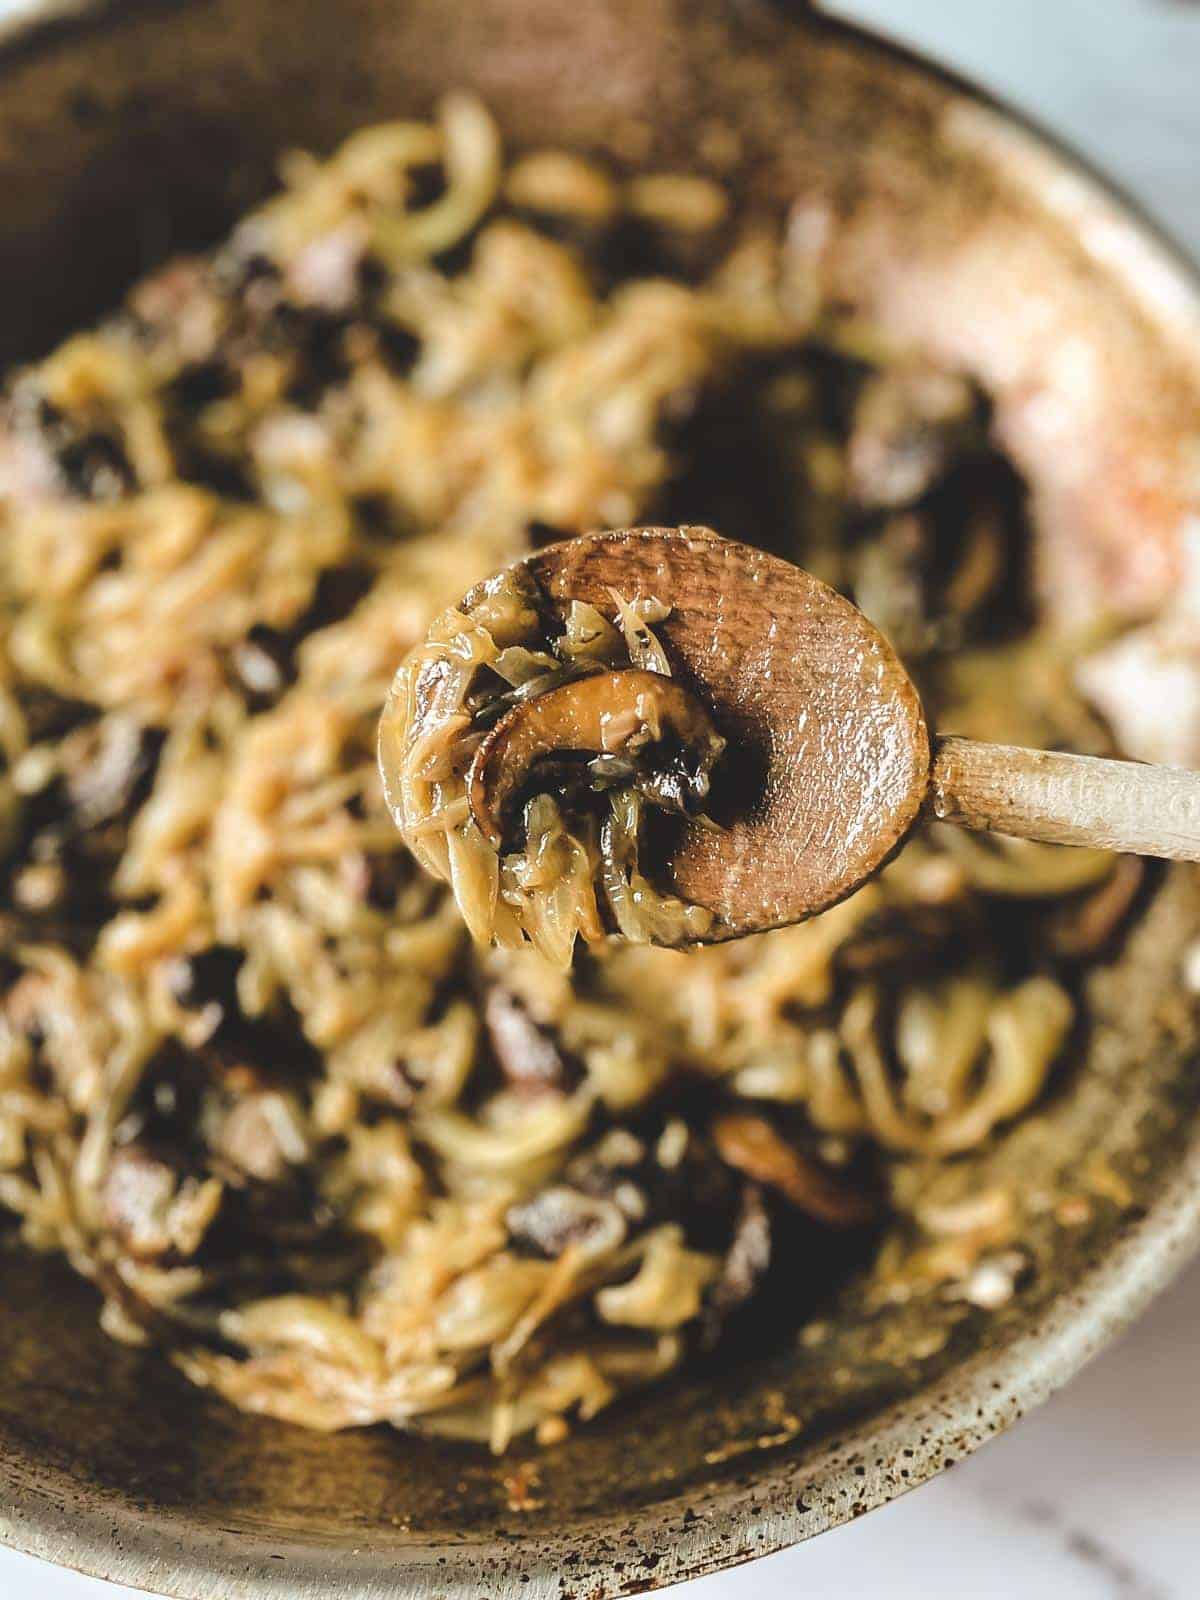 Wooden serving spoon holding up caramelized onions and mushrooms.